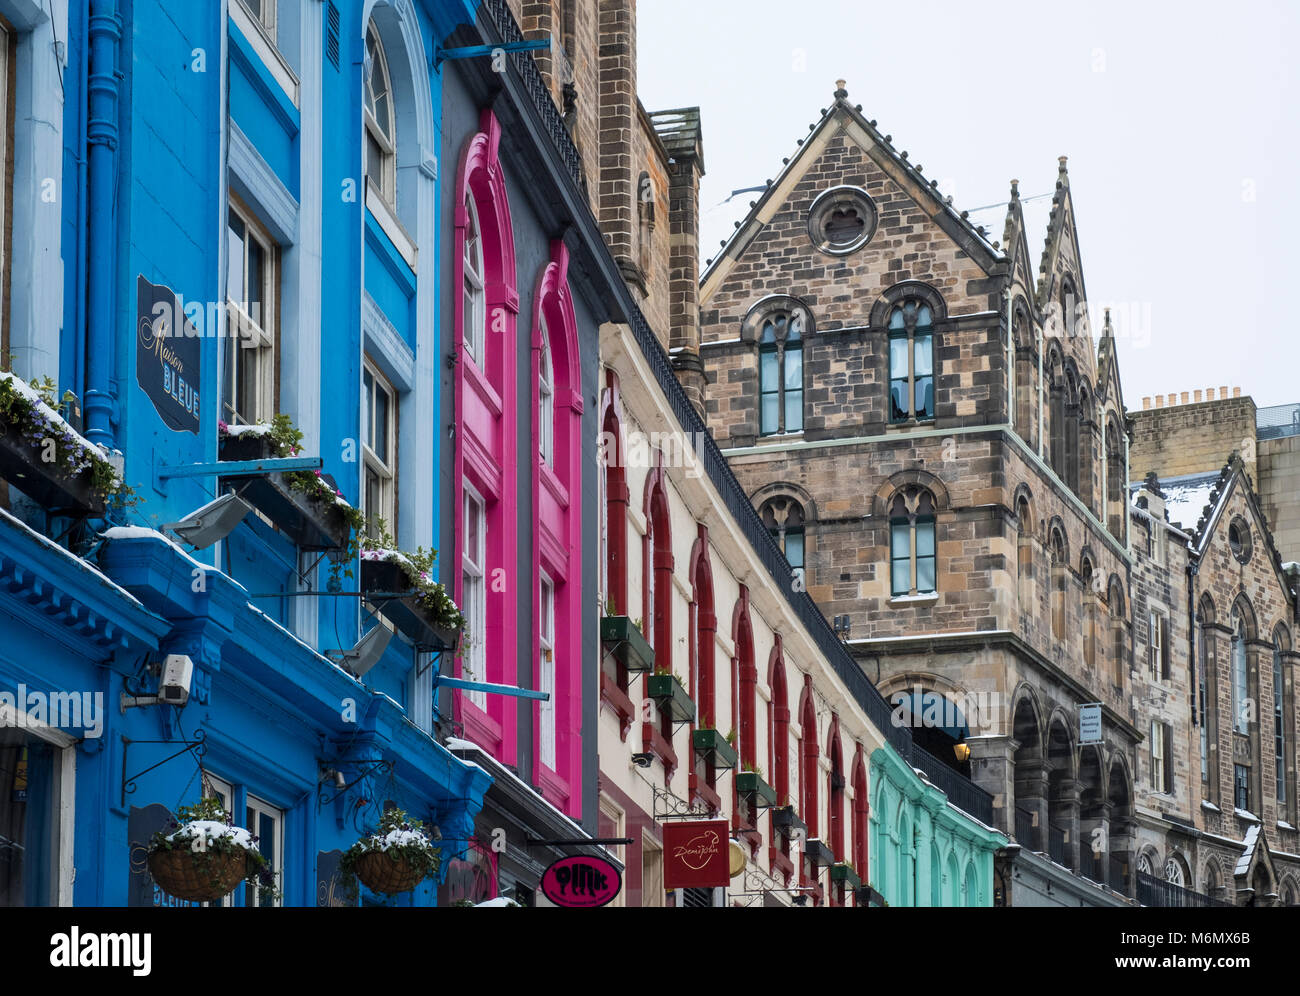 View of colourful shop fronts historic Victoria Street in Edinburgh Old Town after heavy snow, Scotland, United Kingdom Stock Photo